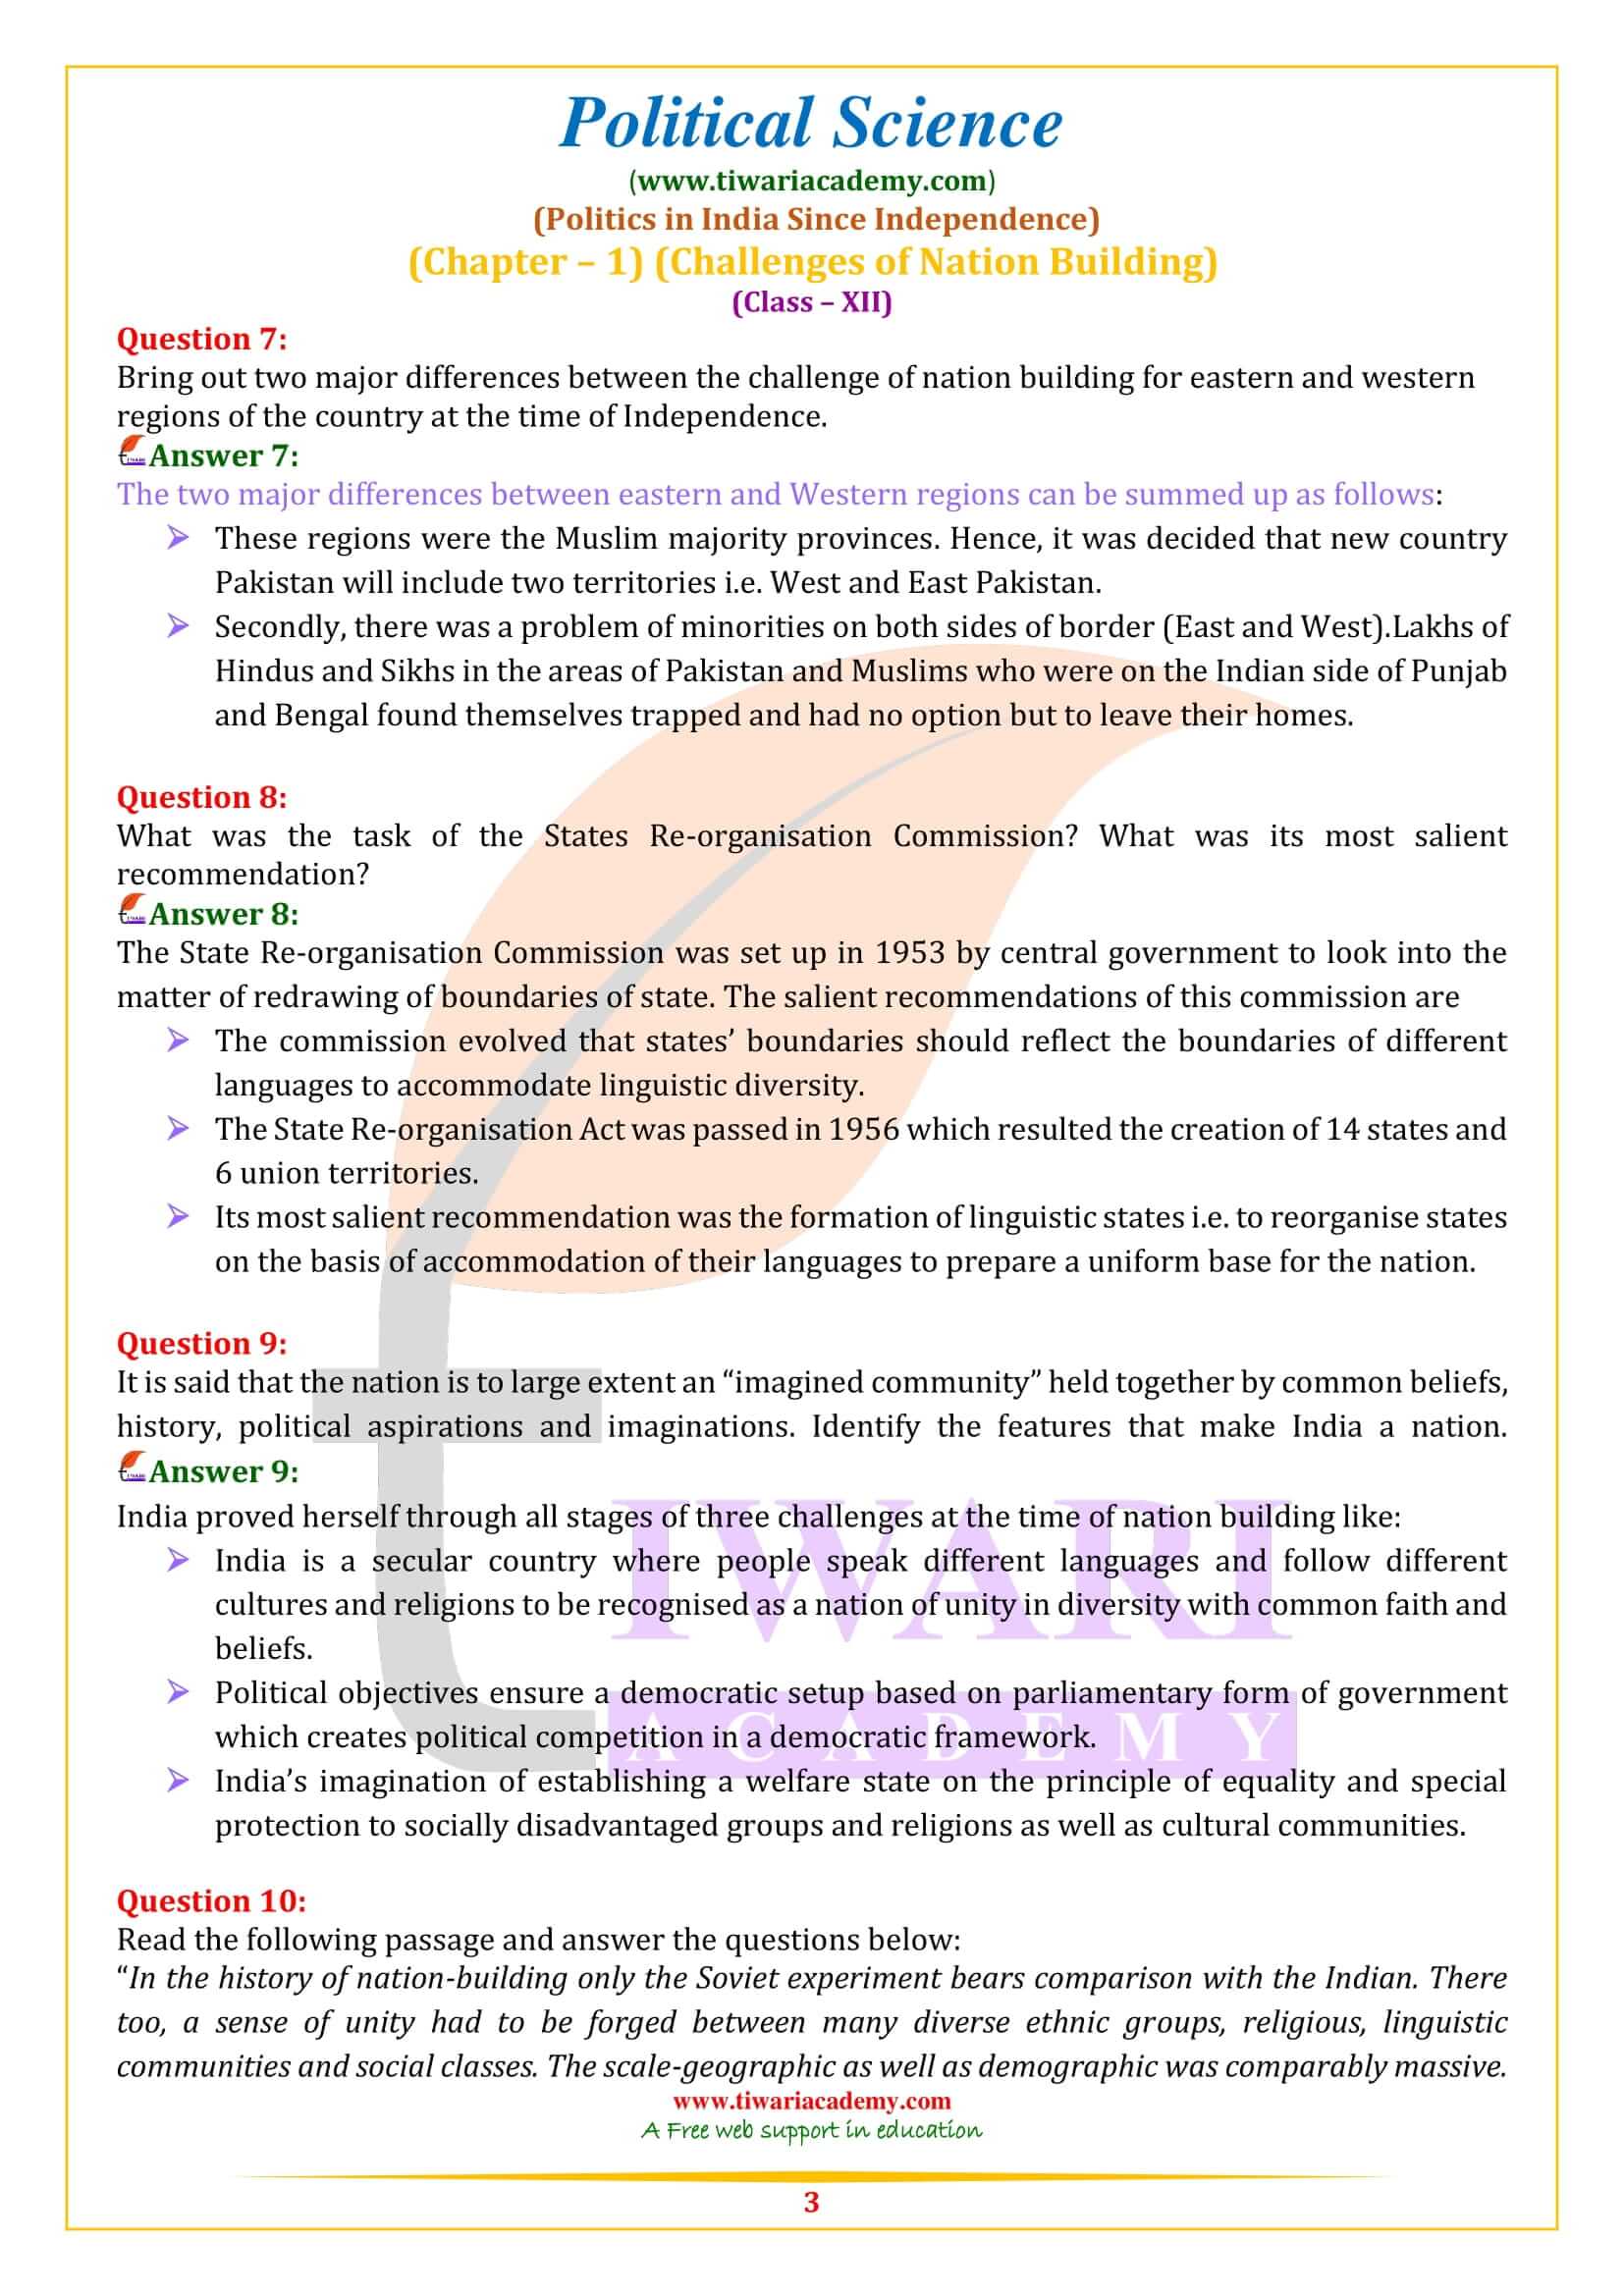 NCERT Solutions for Class 12 Political Science Chapter 1 Part 2